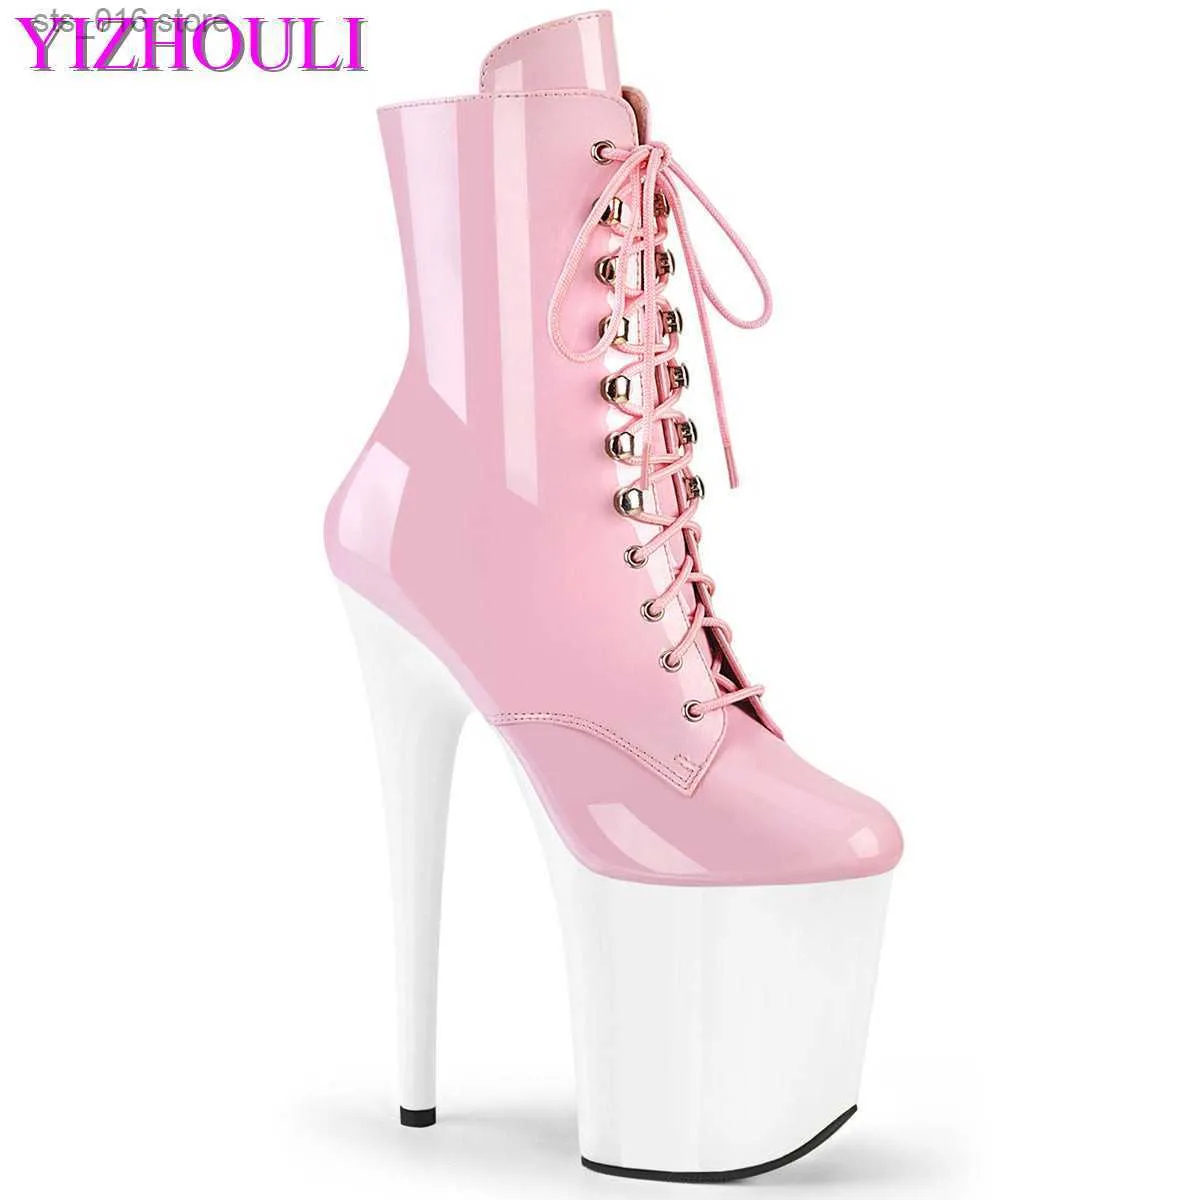 8 High Fashion Sexy Female heel inch Knight Platform ankle for Women autumn winter Shoes 20-23CM pink pole Dancing Boots T230824 731 T23024